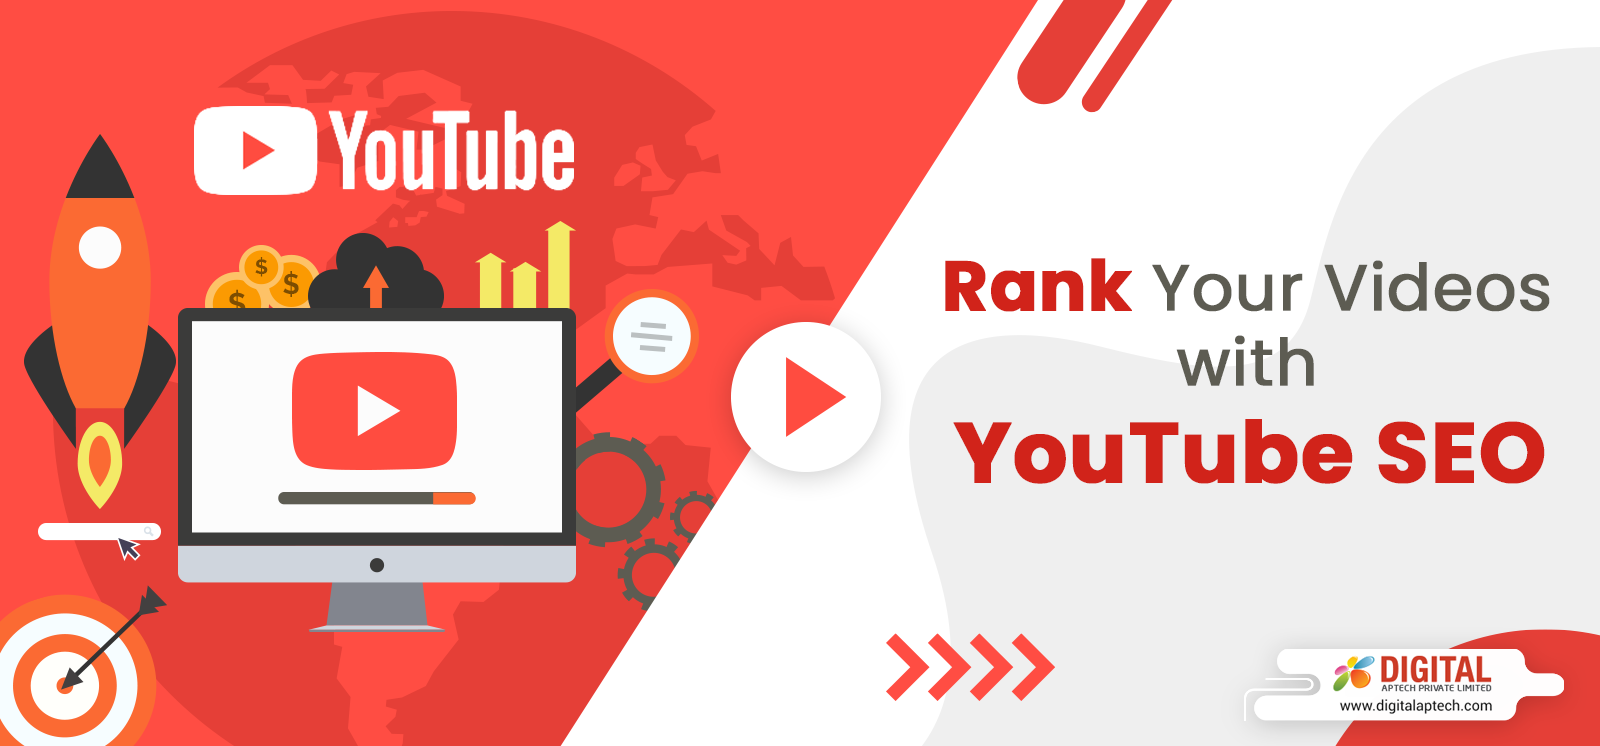 How to Rank Your Videos with YouTube SEO in 2019